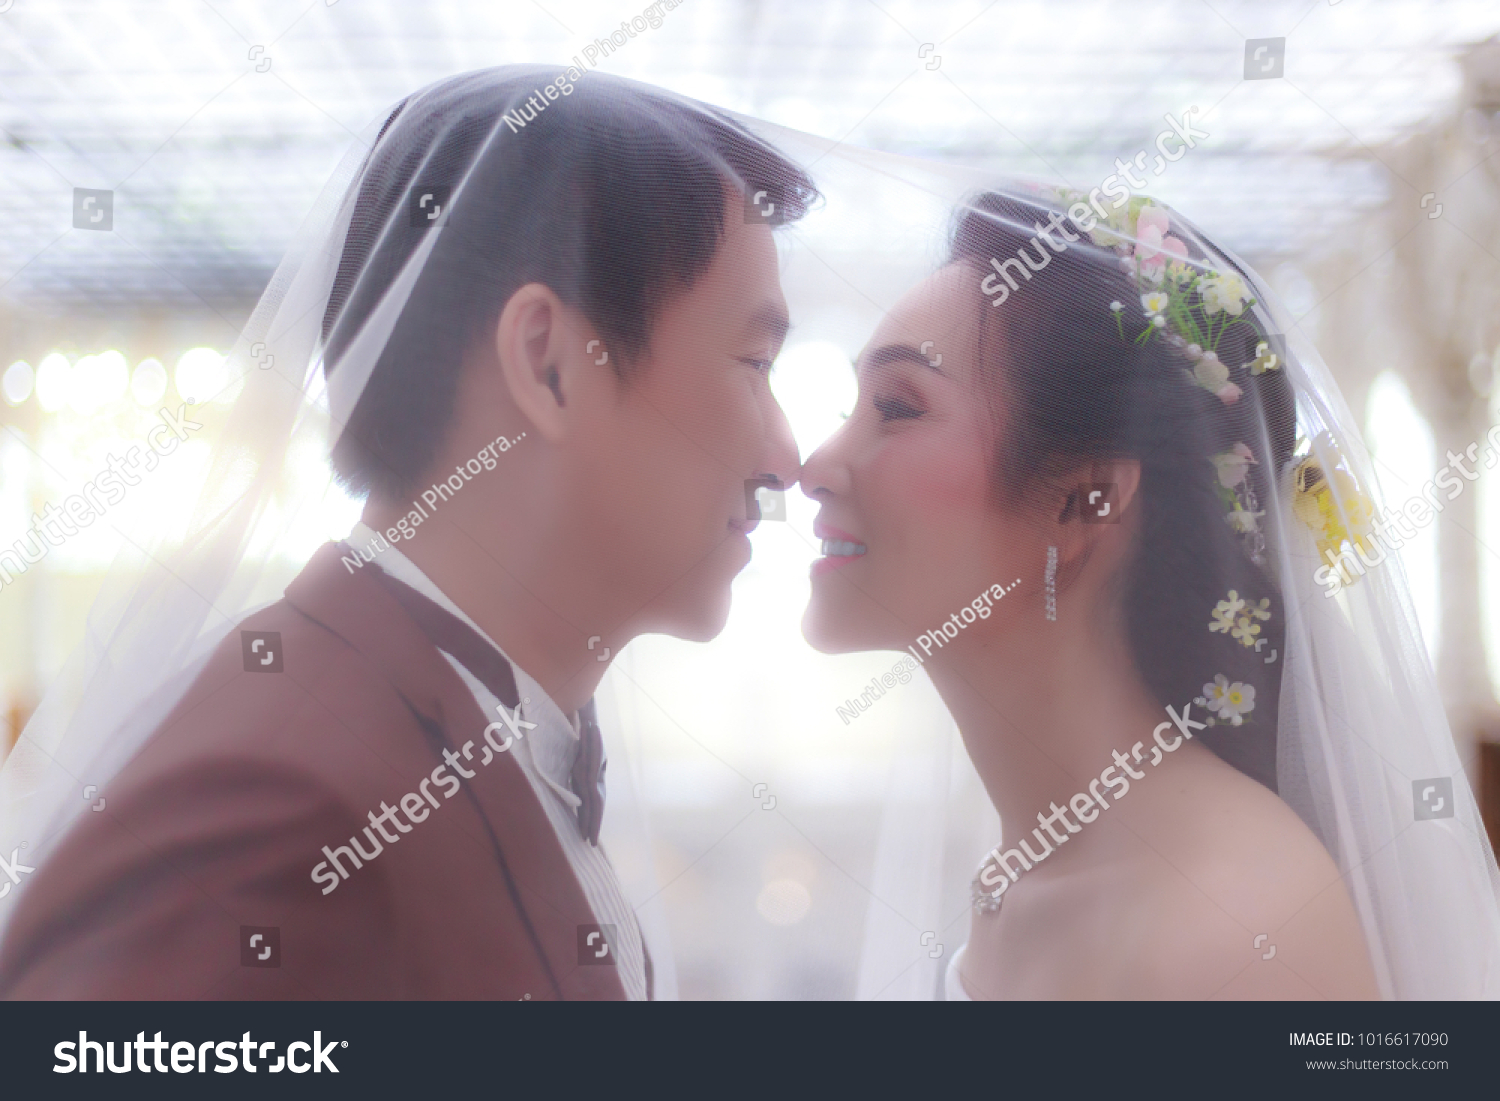 https://image.shutterstock.com/z/stock-photo-beautiful-asian-bride-get-married-with-handsome-asian-bloom-they-feel-happy-attractive-guy-is-1016617090.jpg